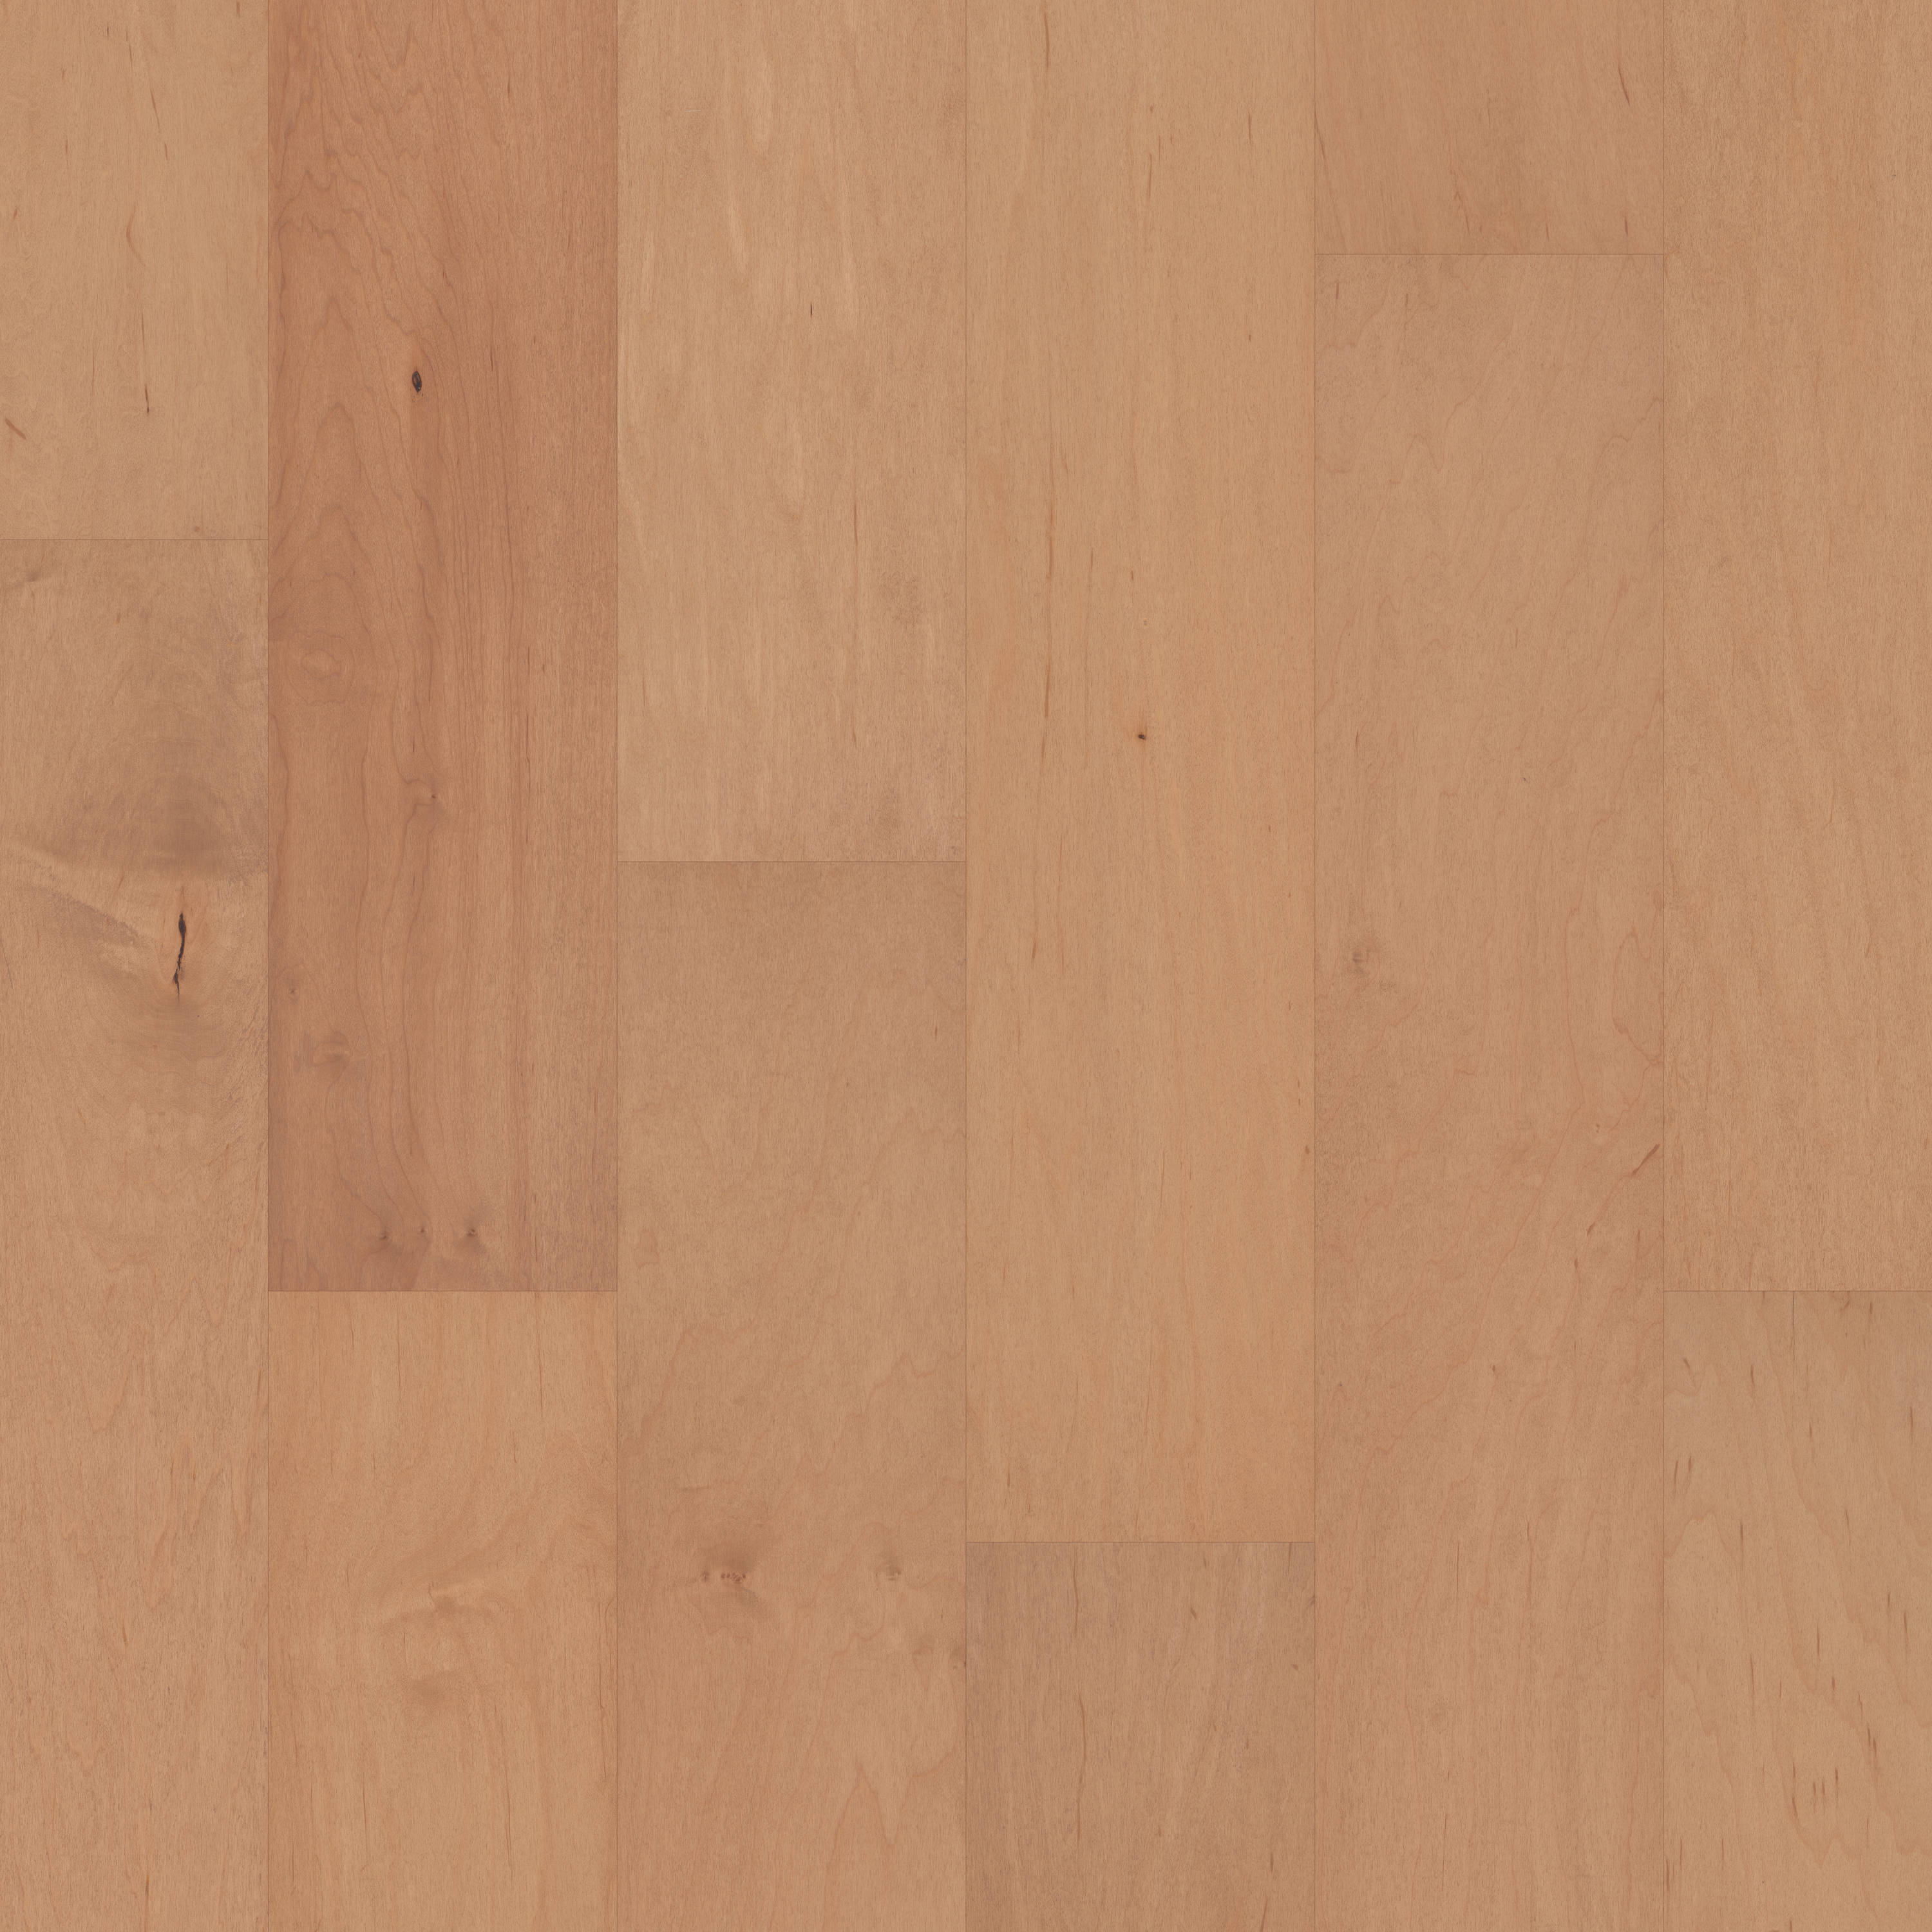 Smartcore Naturals Monteagle Maple 6 1, Maple Engineered Hardwood Flooring Pros And Cons